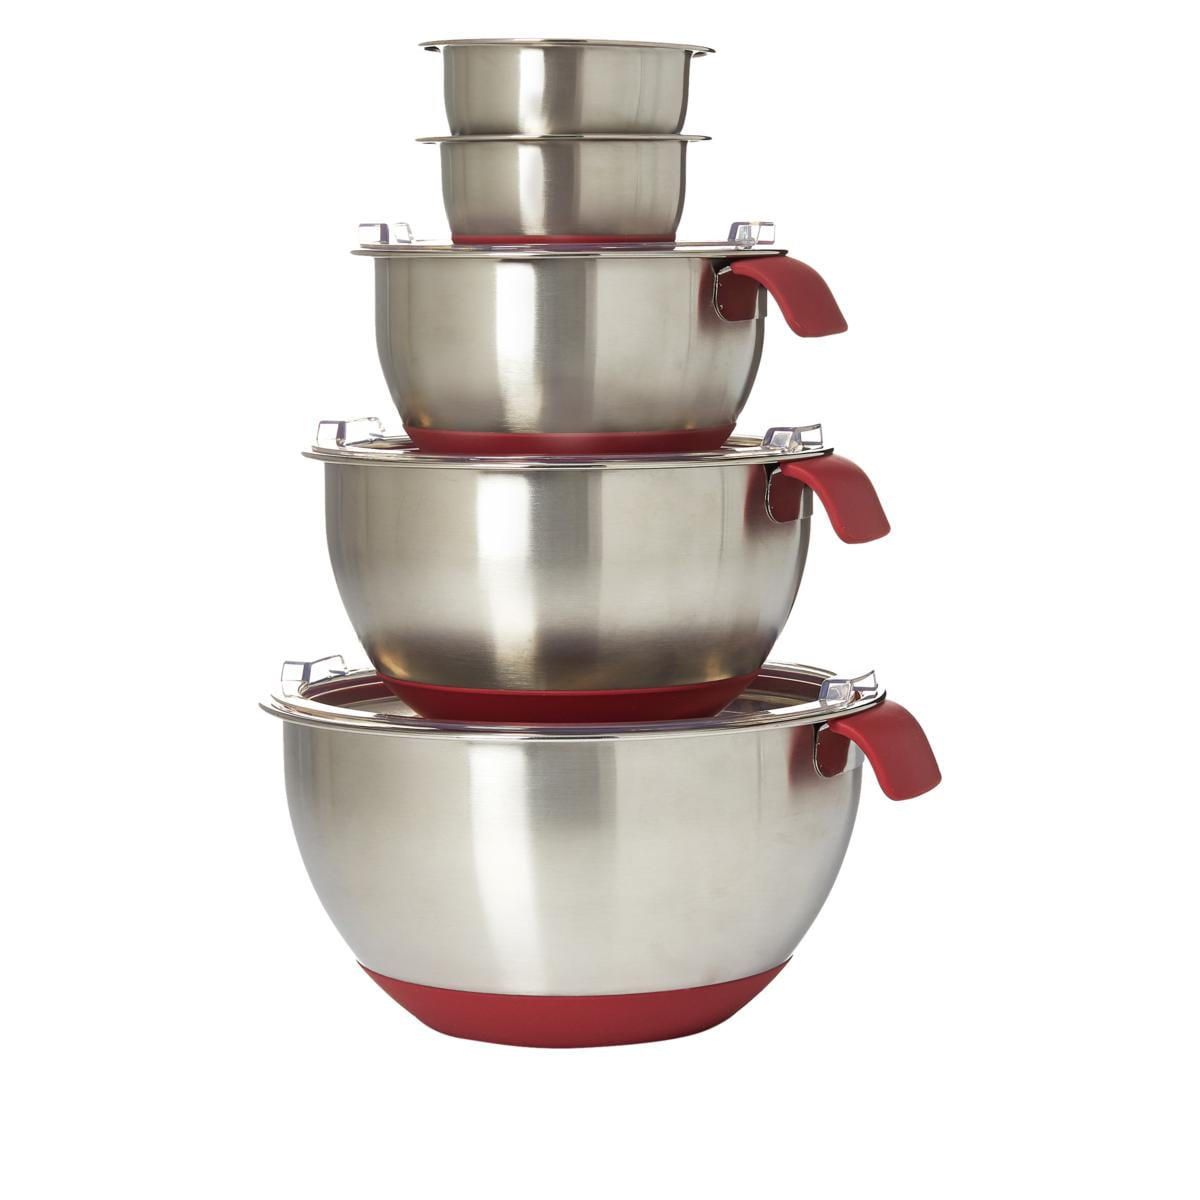 Wolfgang Puck 12-Piece Stainless Steel Mixing Bowls